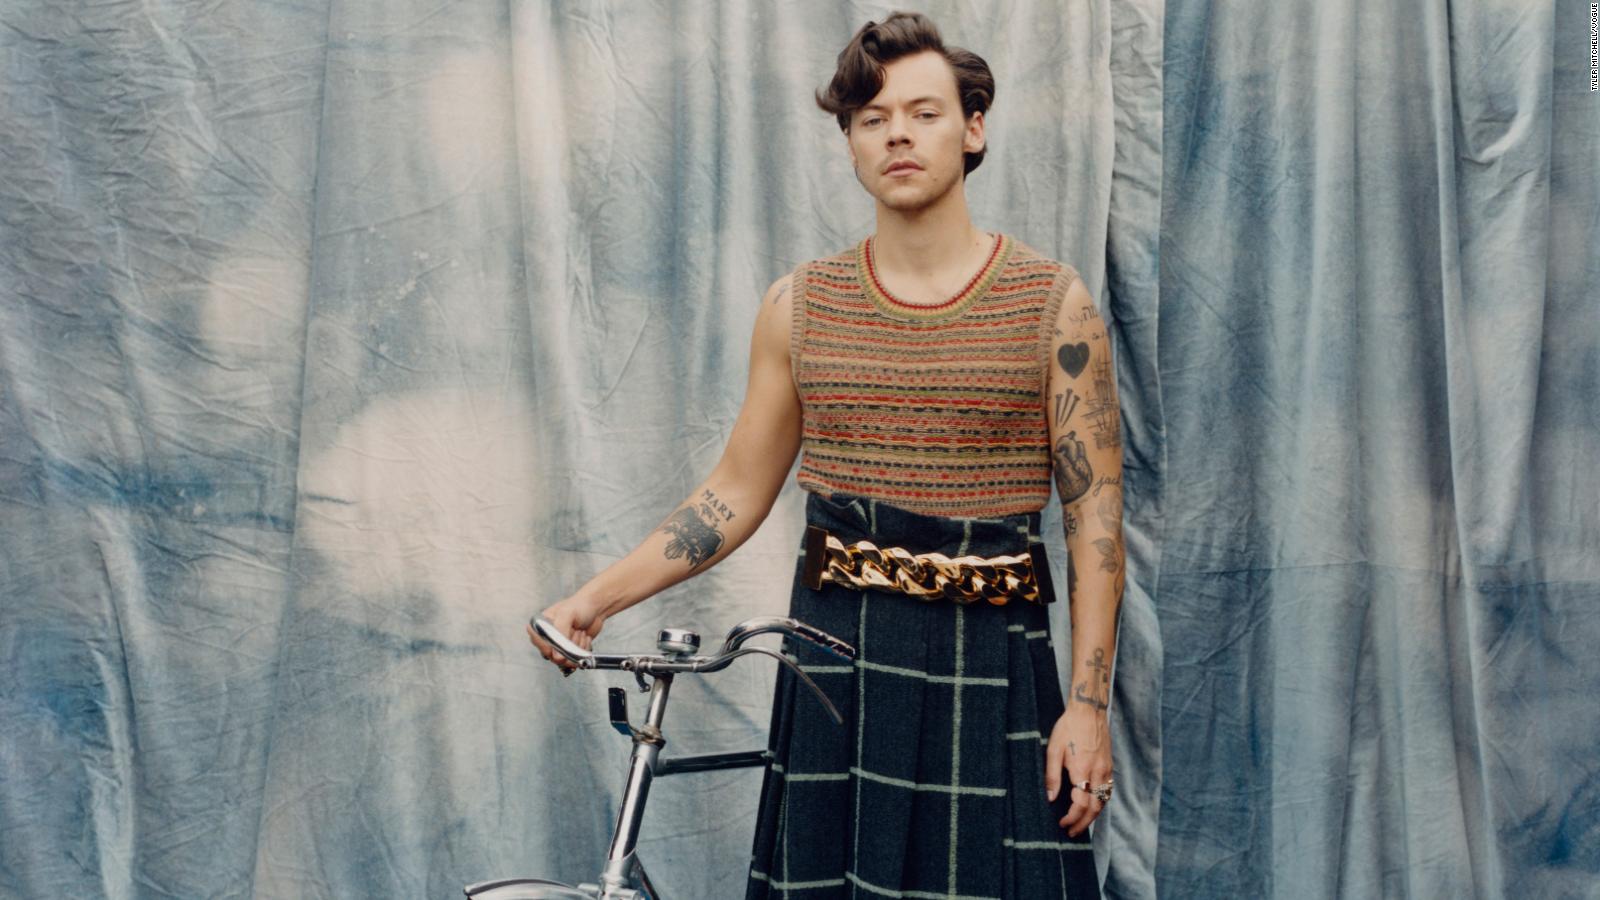 Harry Styles Becomes Vogue's First Ever Solo Male Cover Star